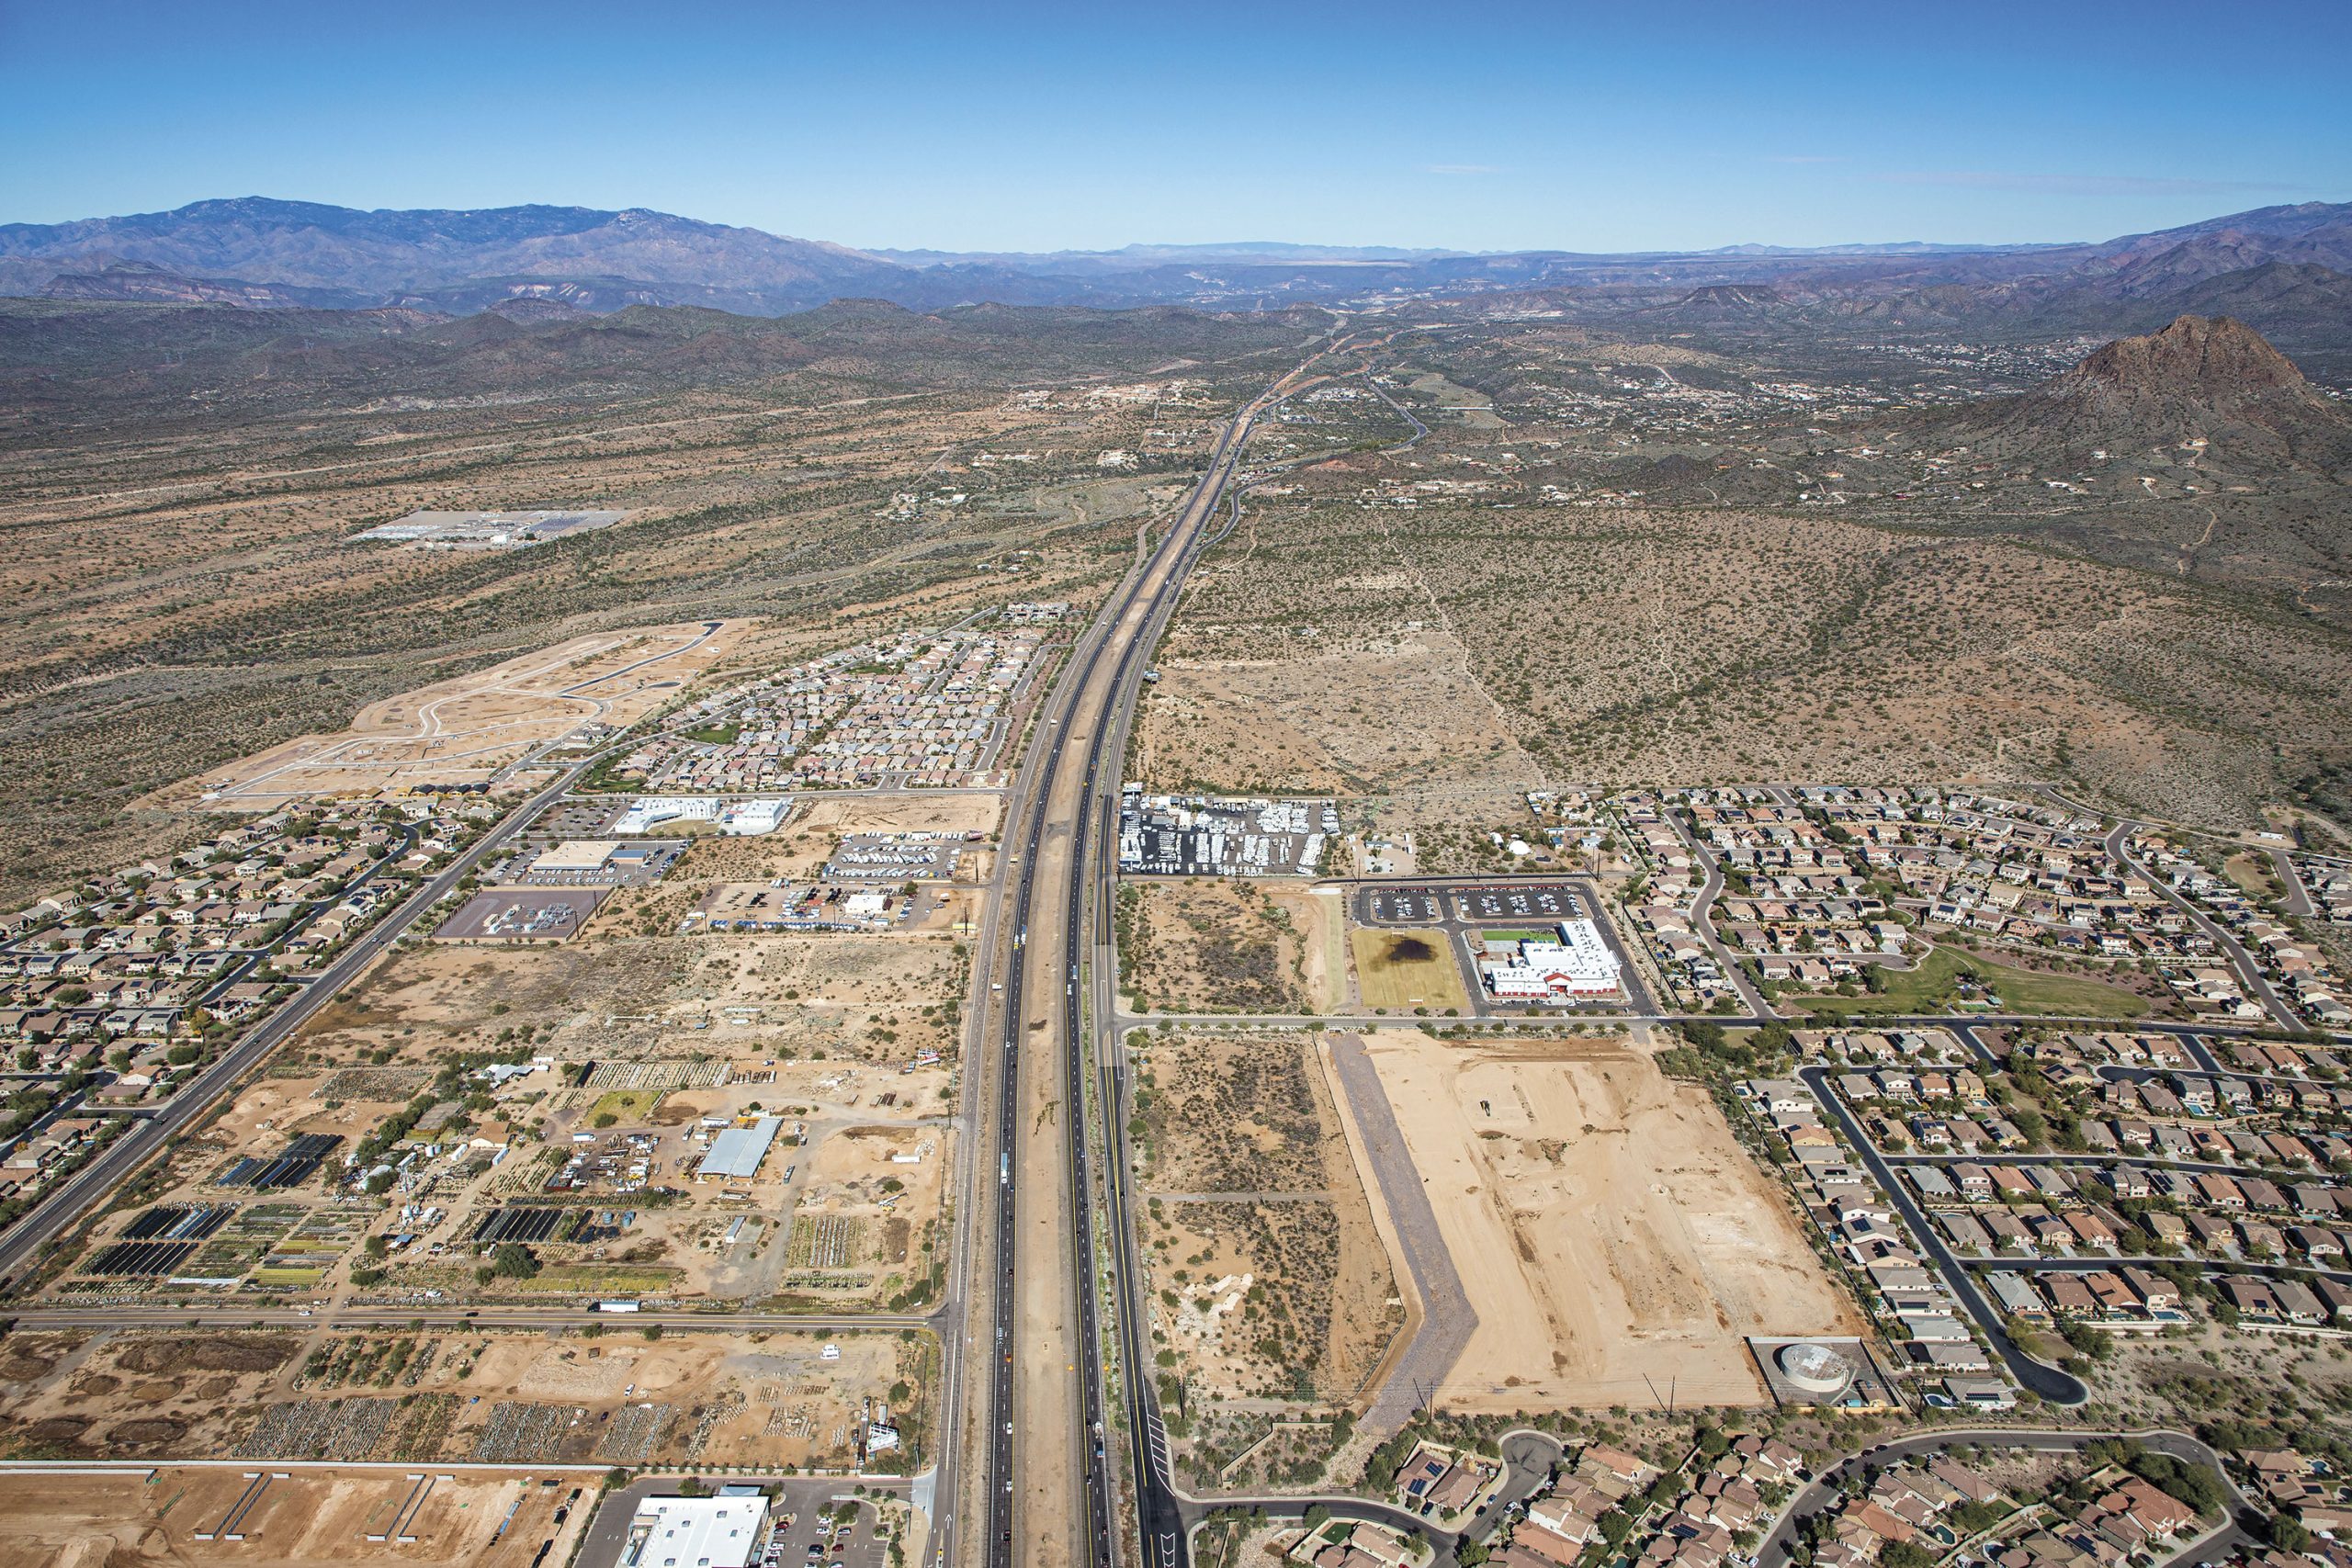 Aerial view of Anthem, looking northbound along Interstate 17; Photo courtesy stock.adobe.com